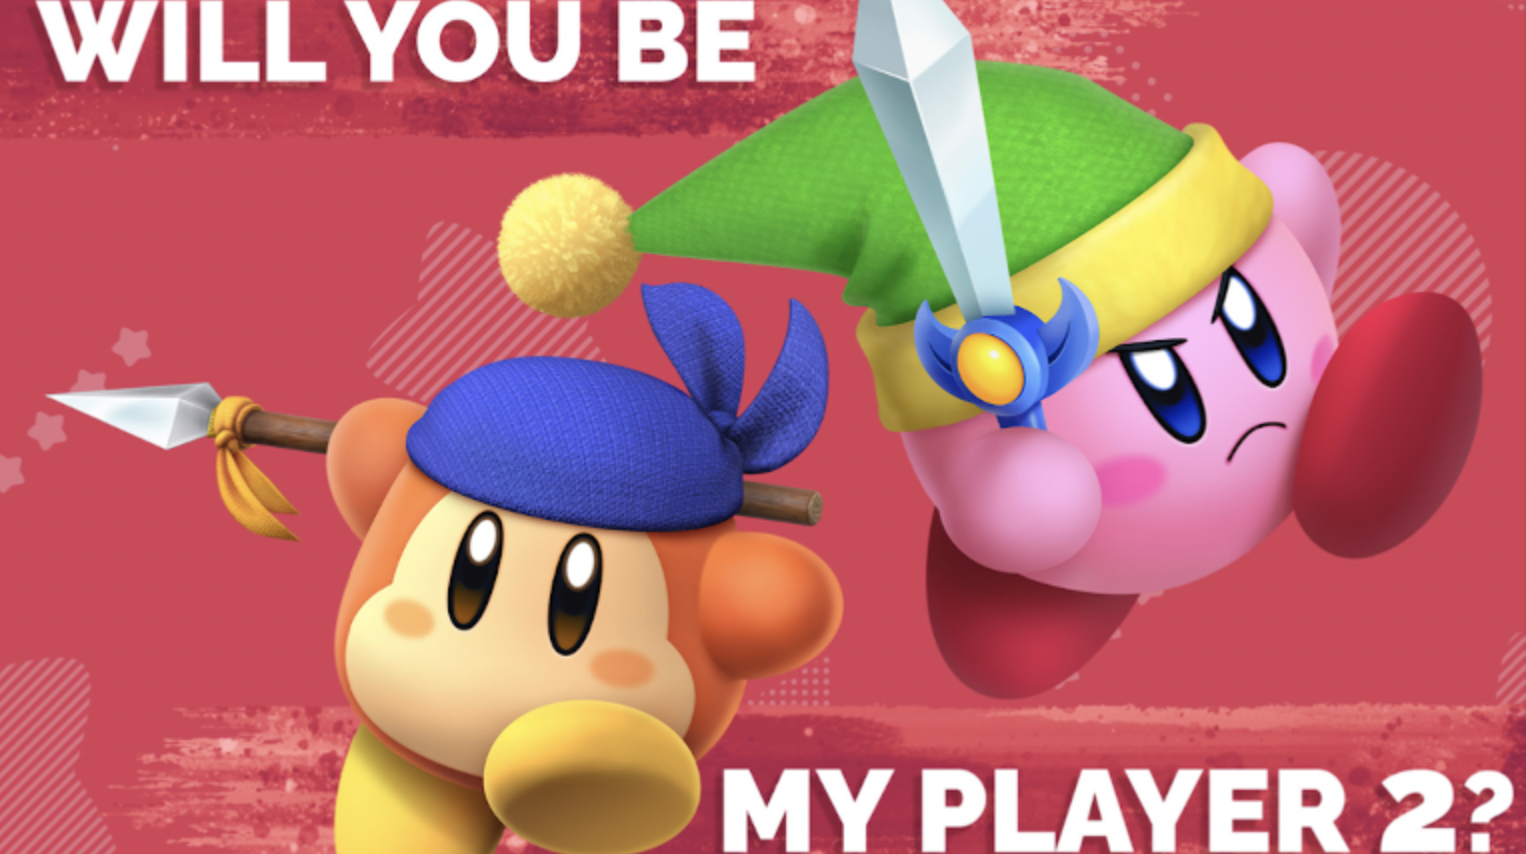 Nintendo Valentine’s Day Cards Include Kirby, Mario, and Pokemon Designs